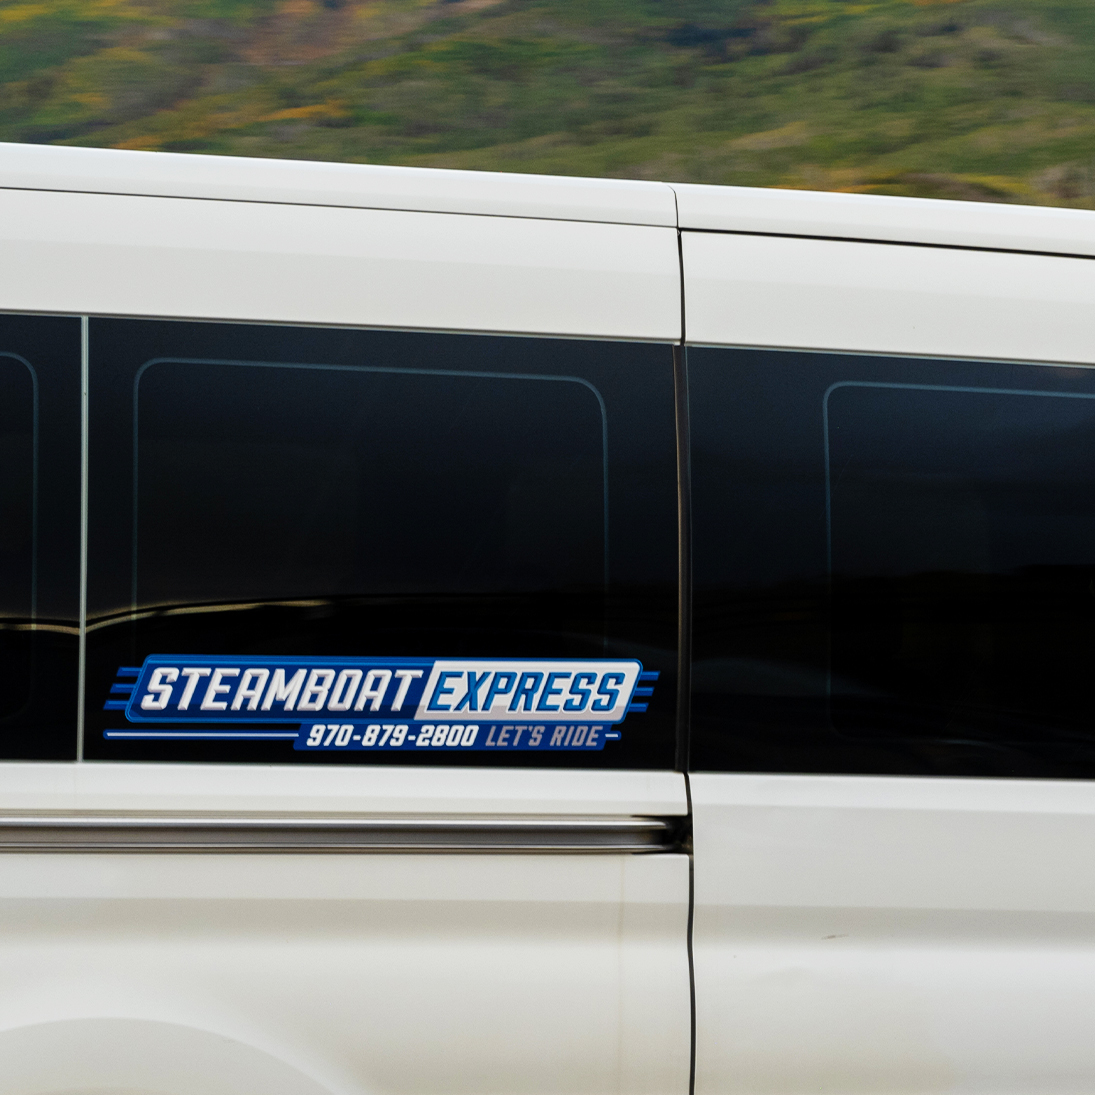 Steamboat Express Shuttle Services Van